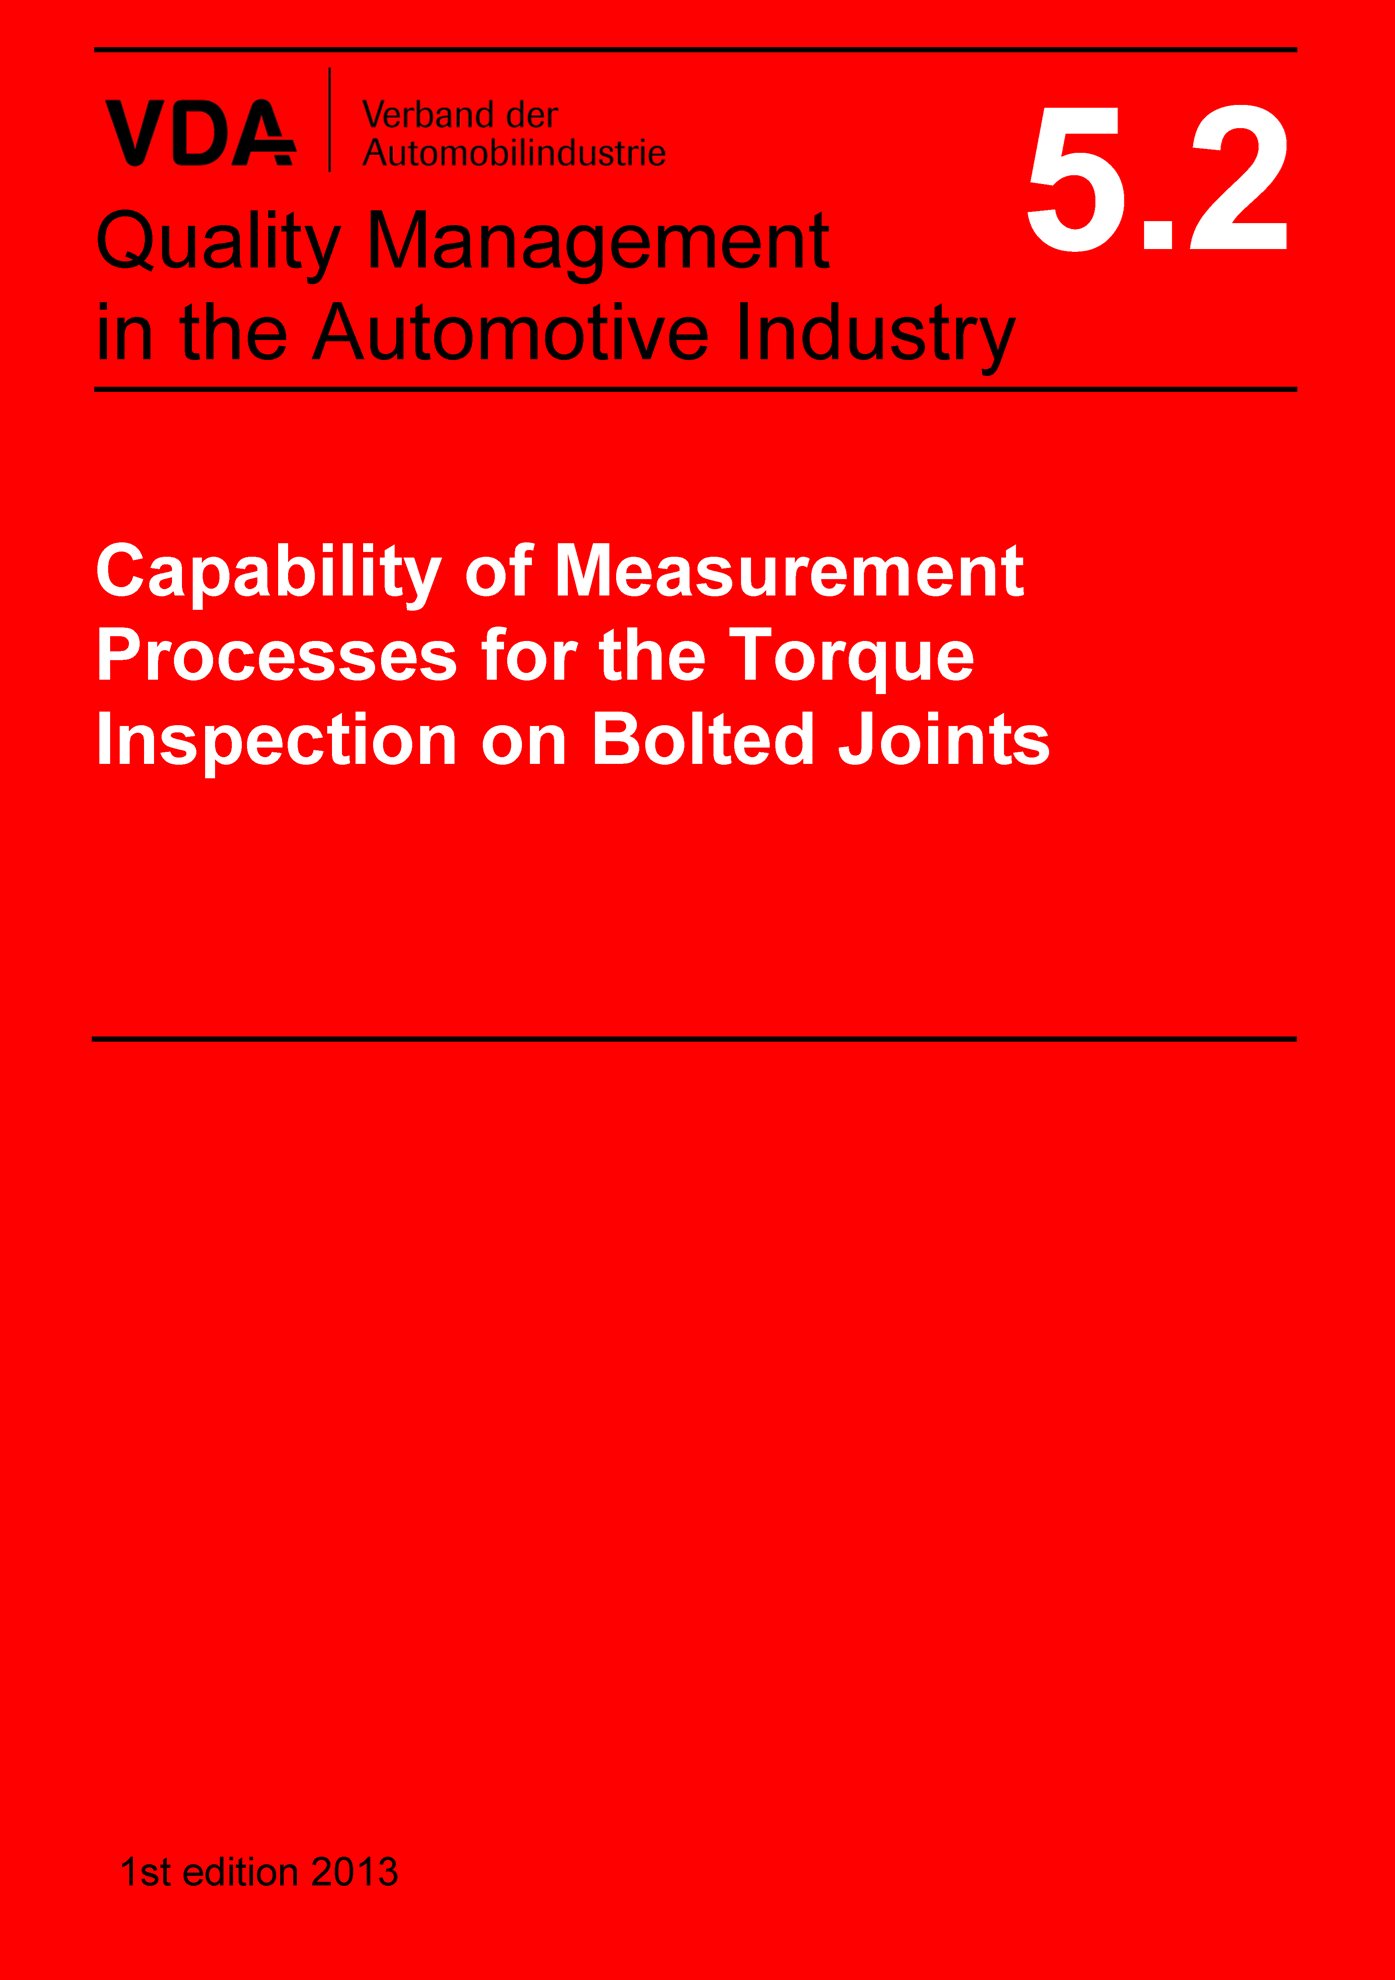 Publikácie  VDA Volume 5.2 - Capability of Measurement
 Processes for the Torque Inspection on Bolted Joints, 1st edition 2013 1.1.2013 náhľad